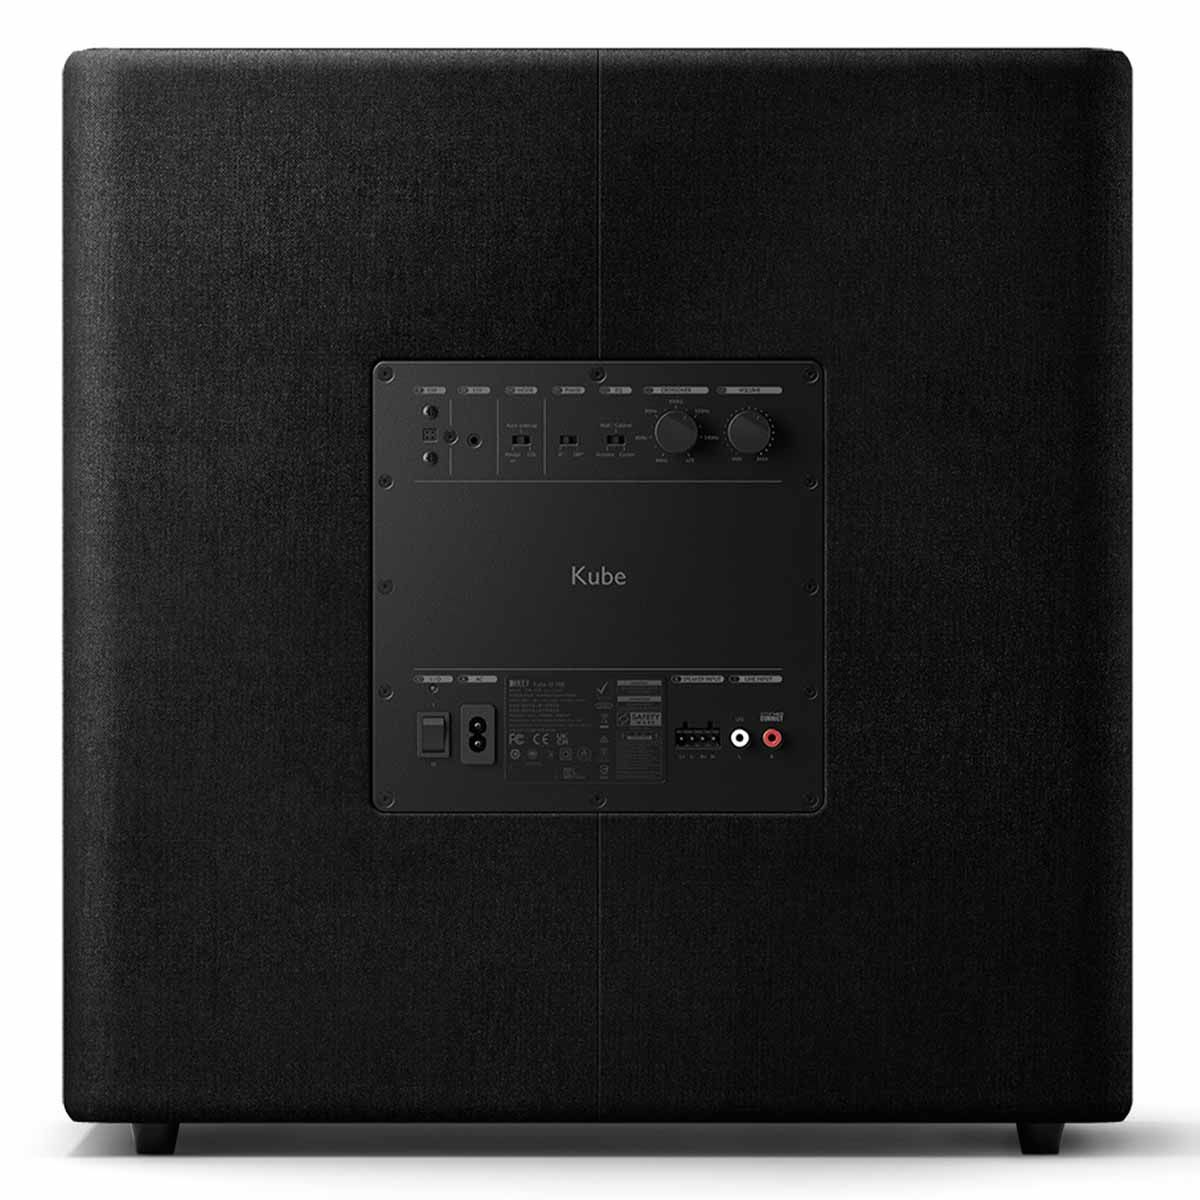 KEF Kube 15 MIE Subwoofer - Black rear view